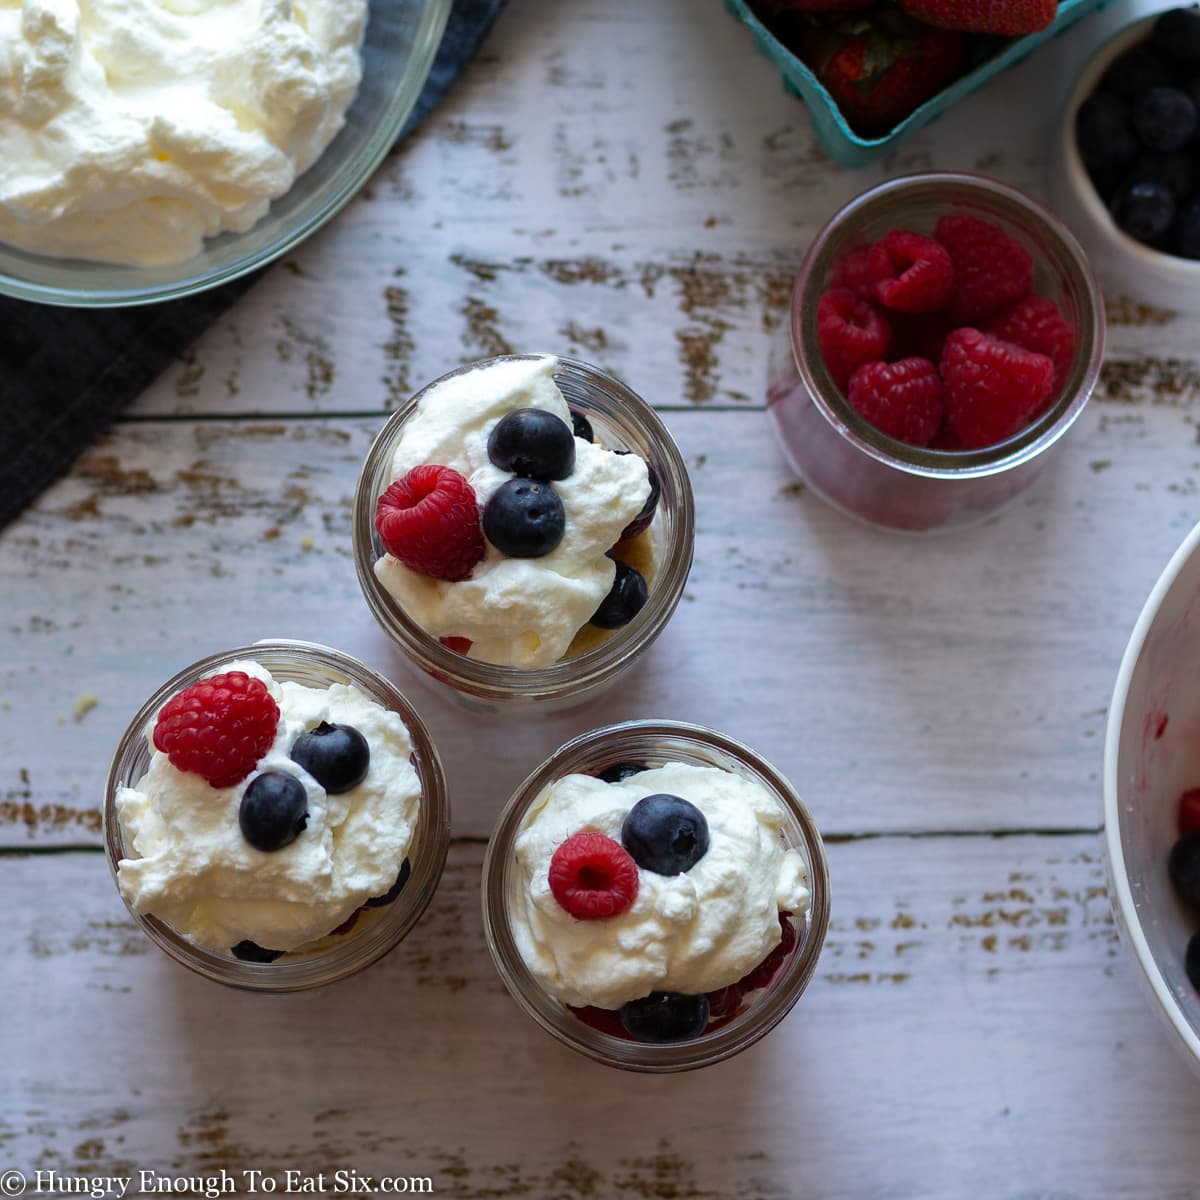 Looking down on three jars with cream and berries in them